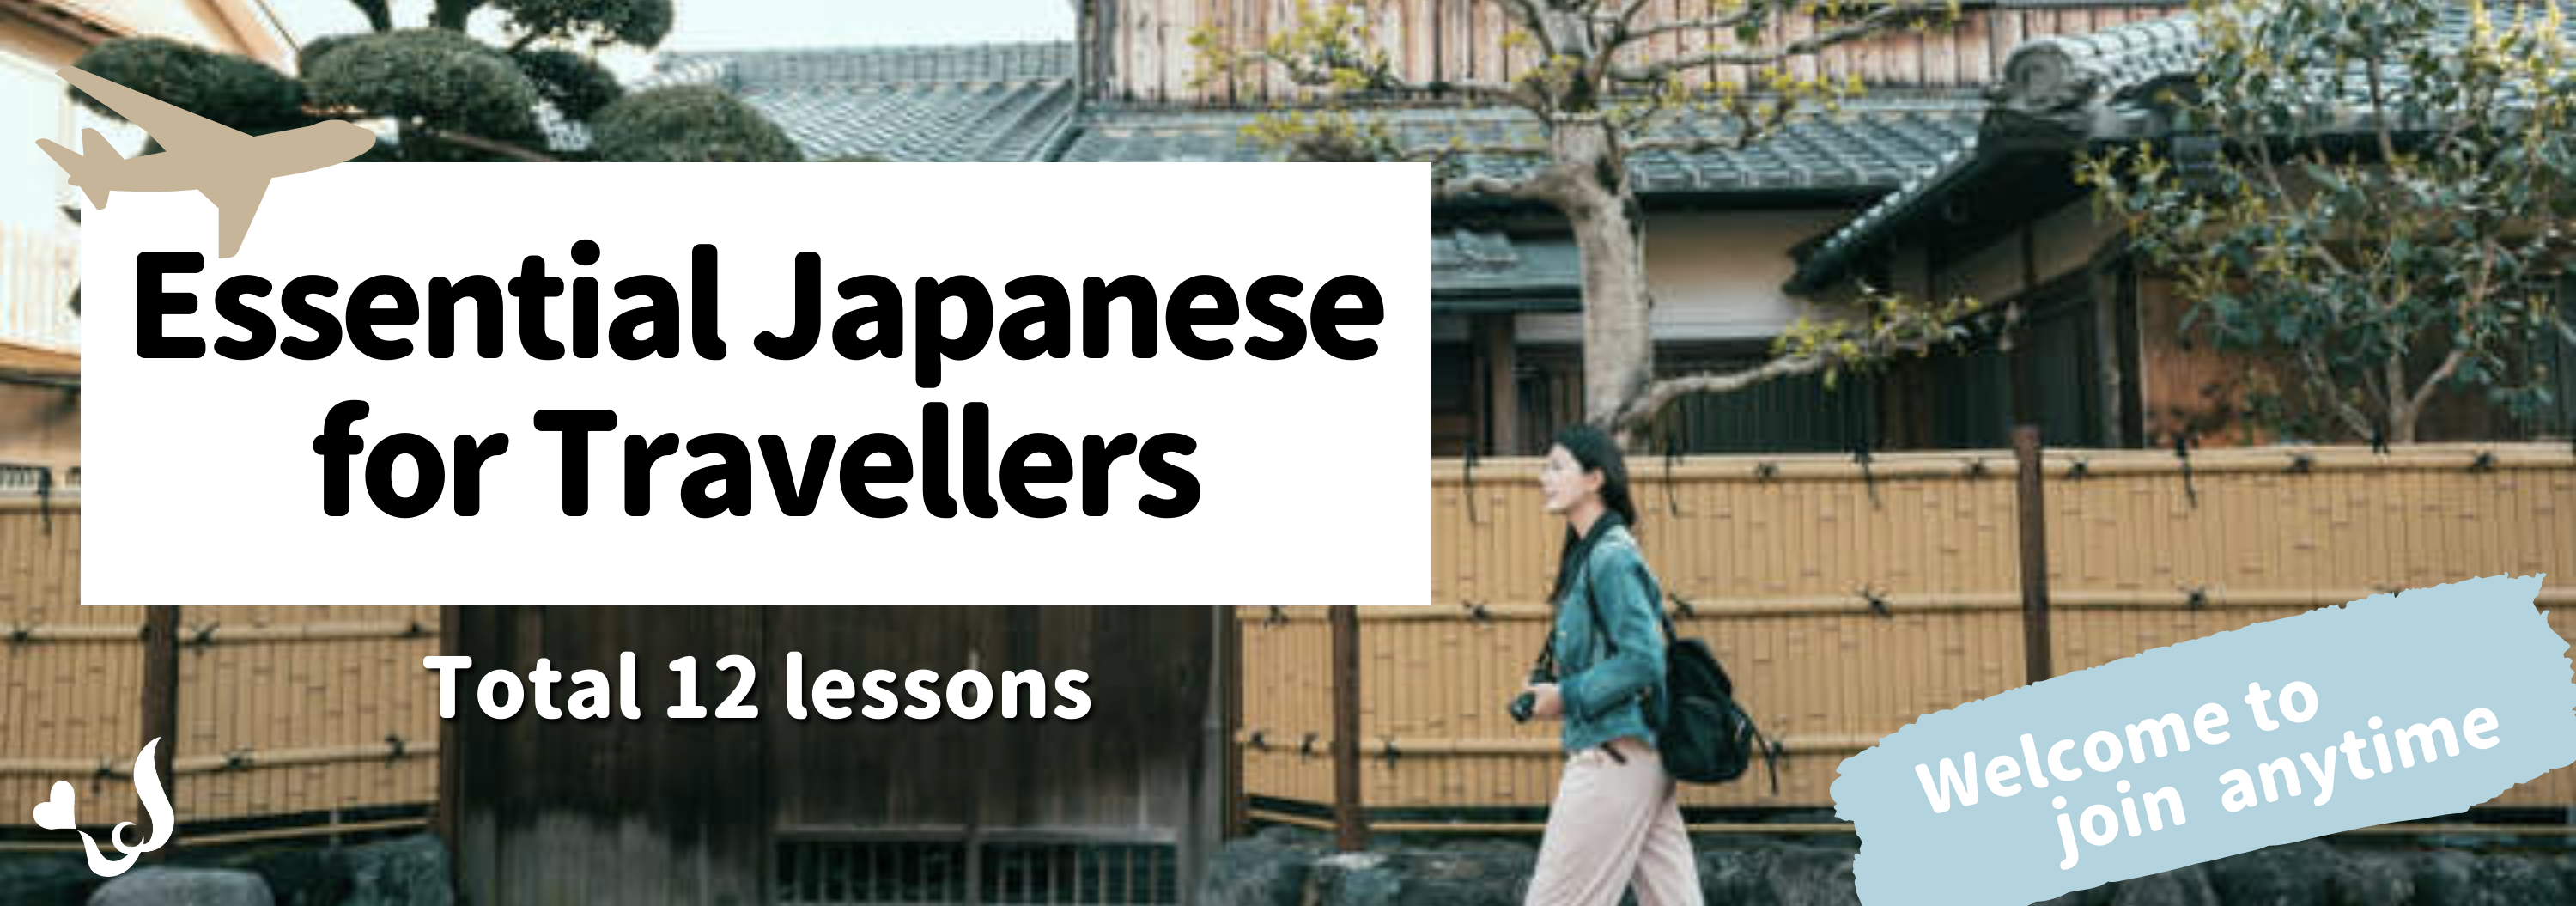 Essential Japanese for travellers